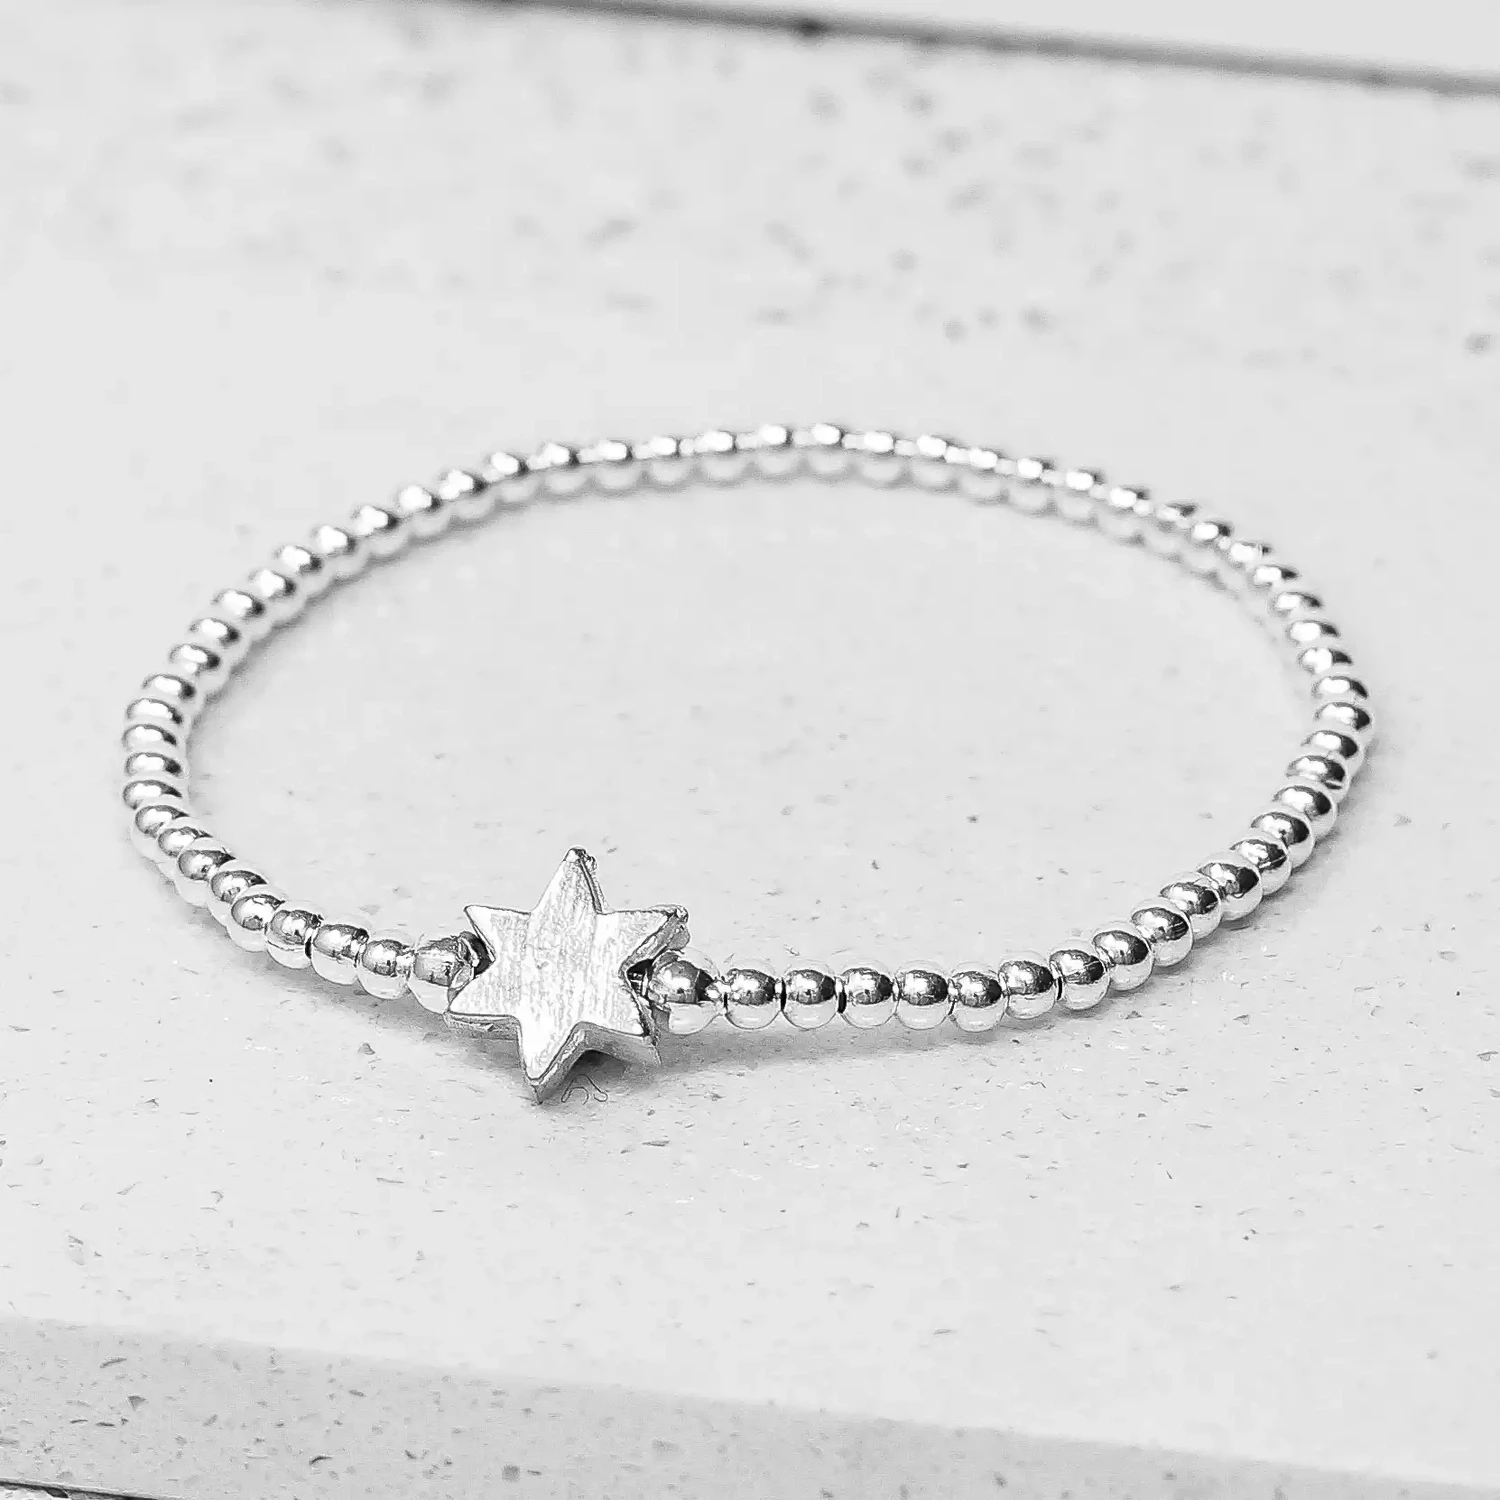 Seed Bead Bracelet With Pewter Star Charm - Just Because by Metal Planet